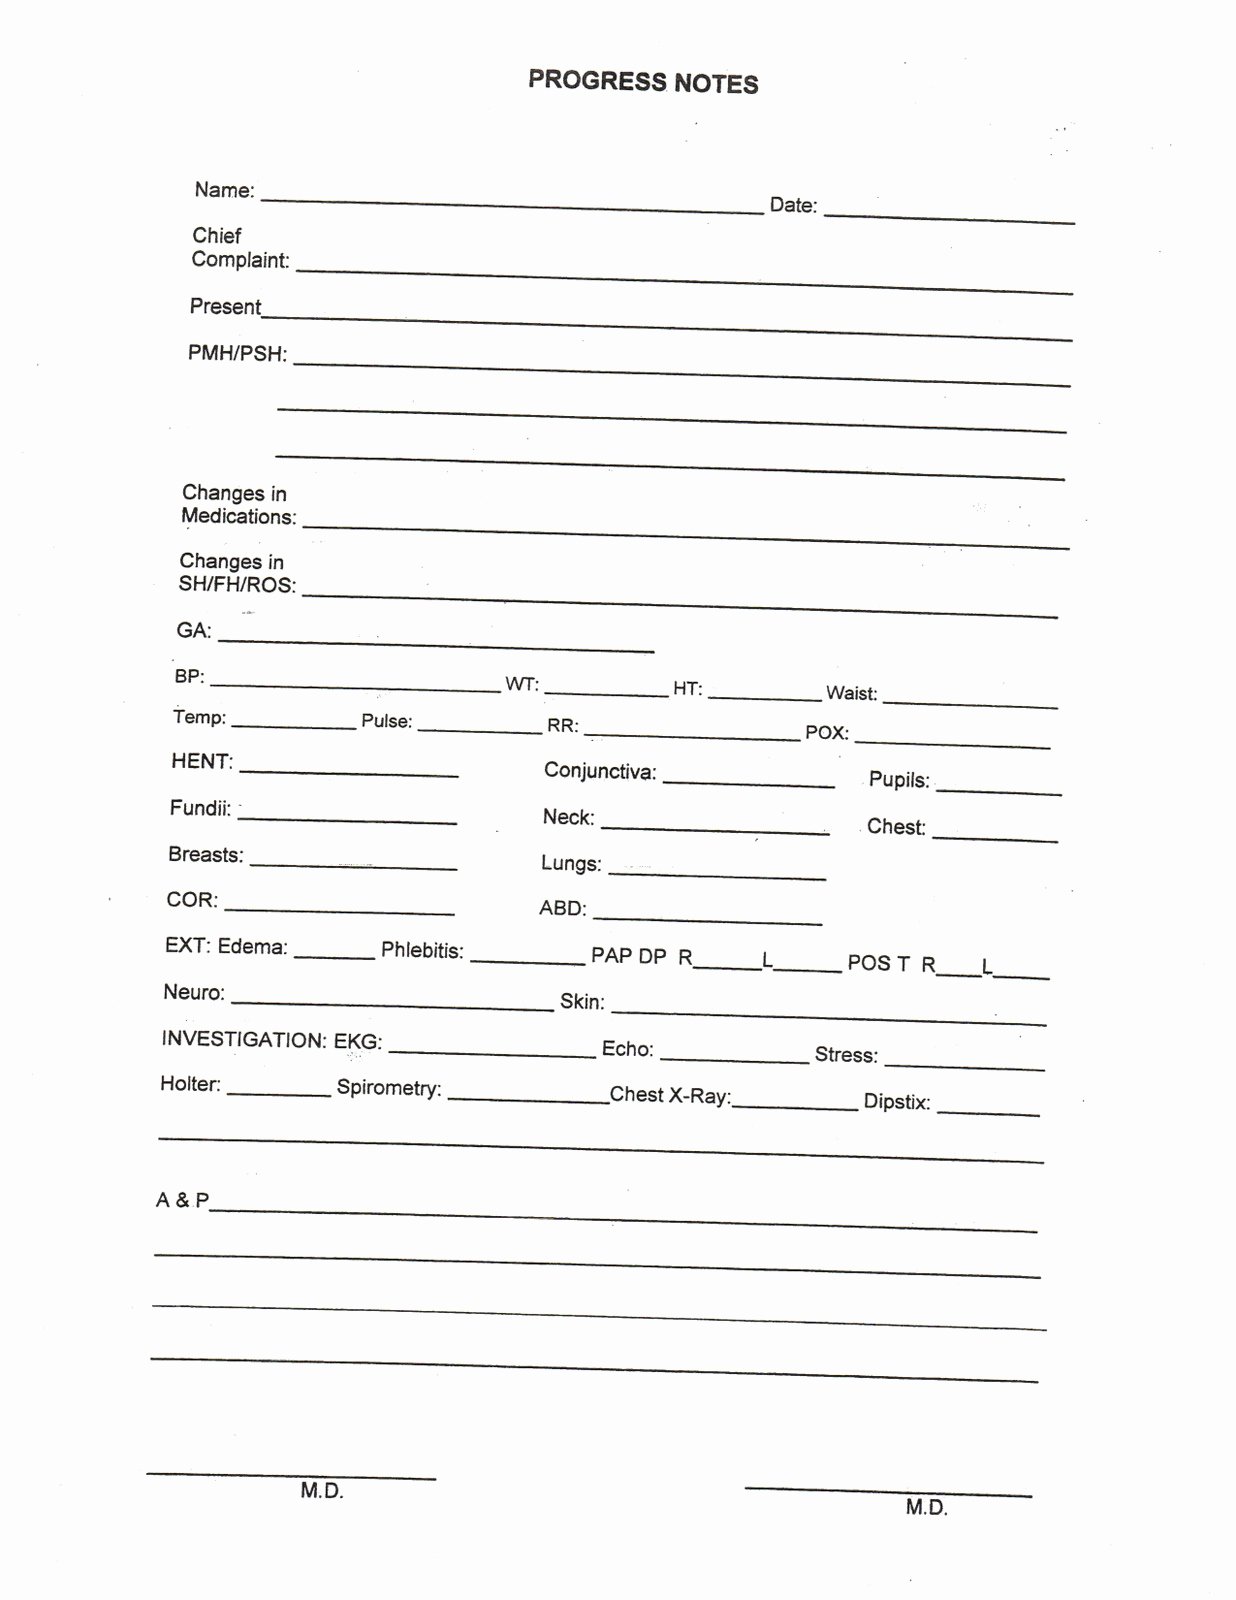 Medical Progress Notes Template Lovely 9 Best Of Medical Progress Notes forms Medical